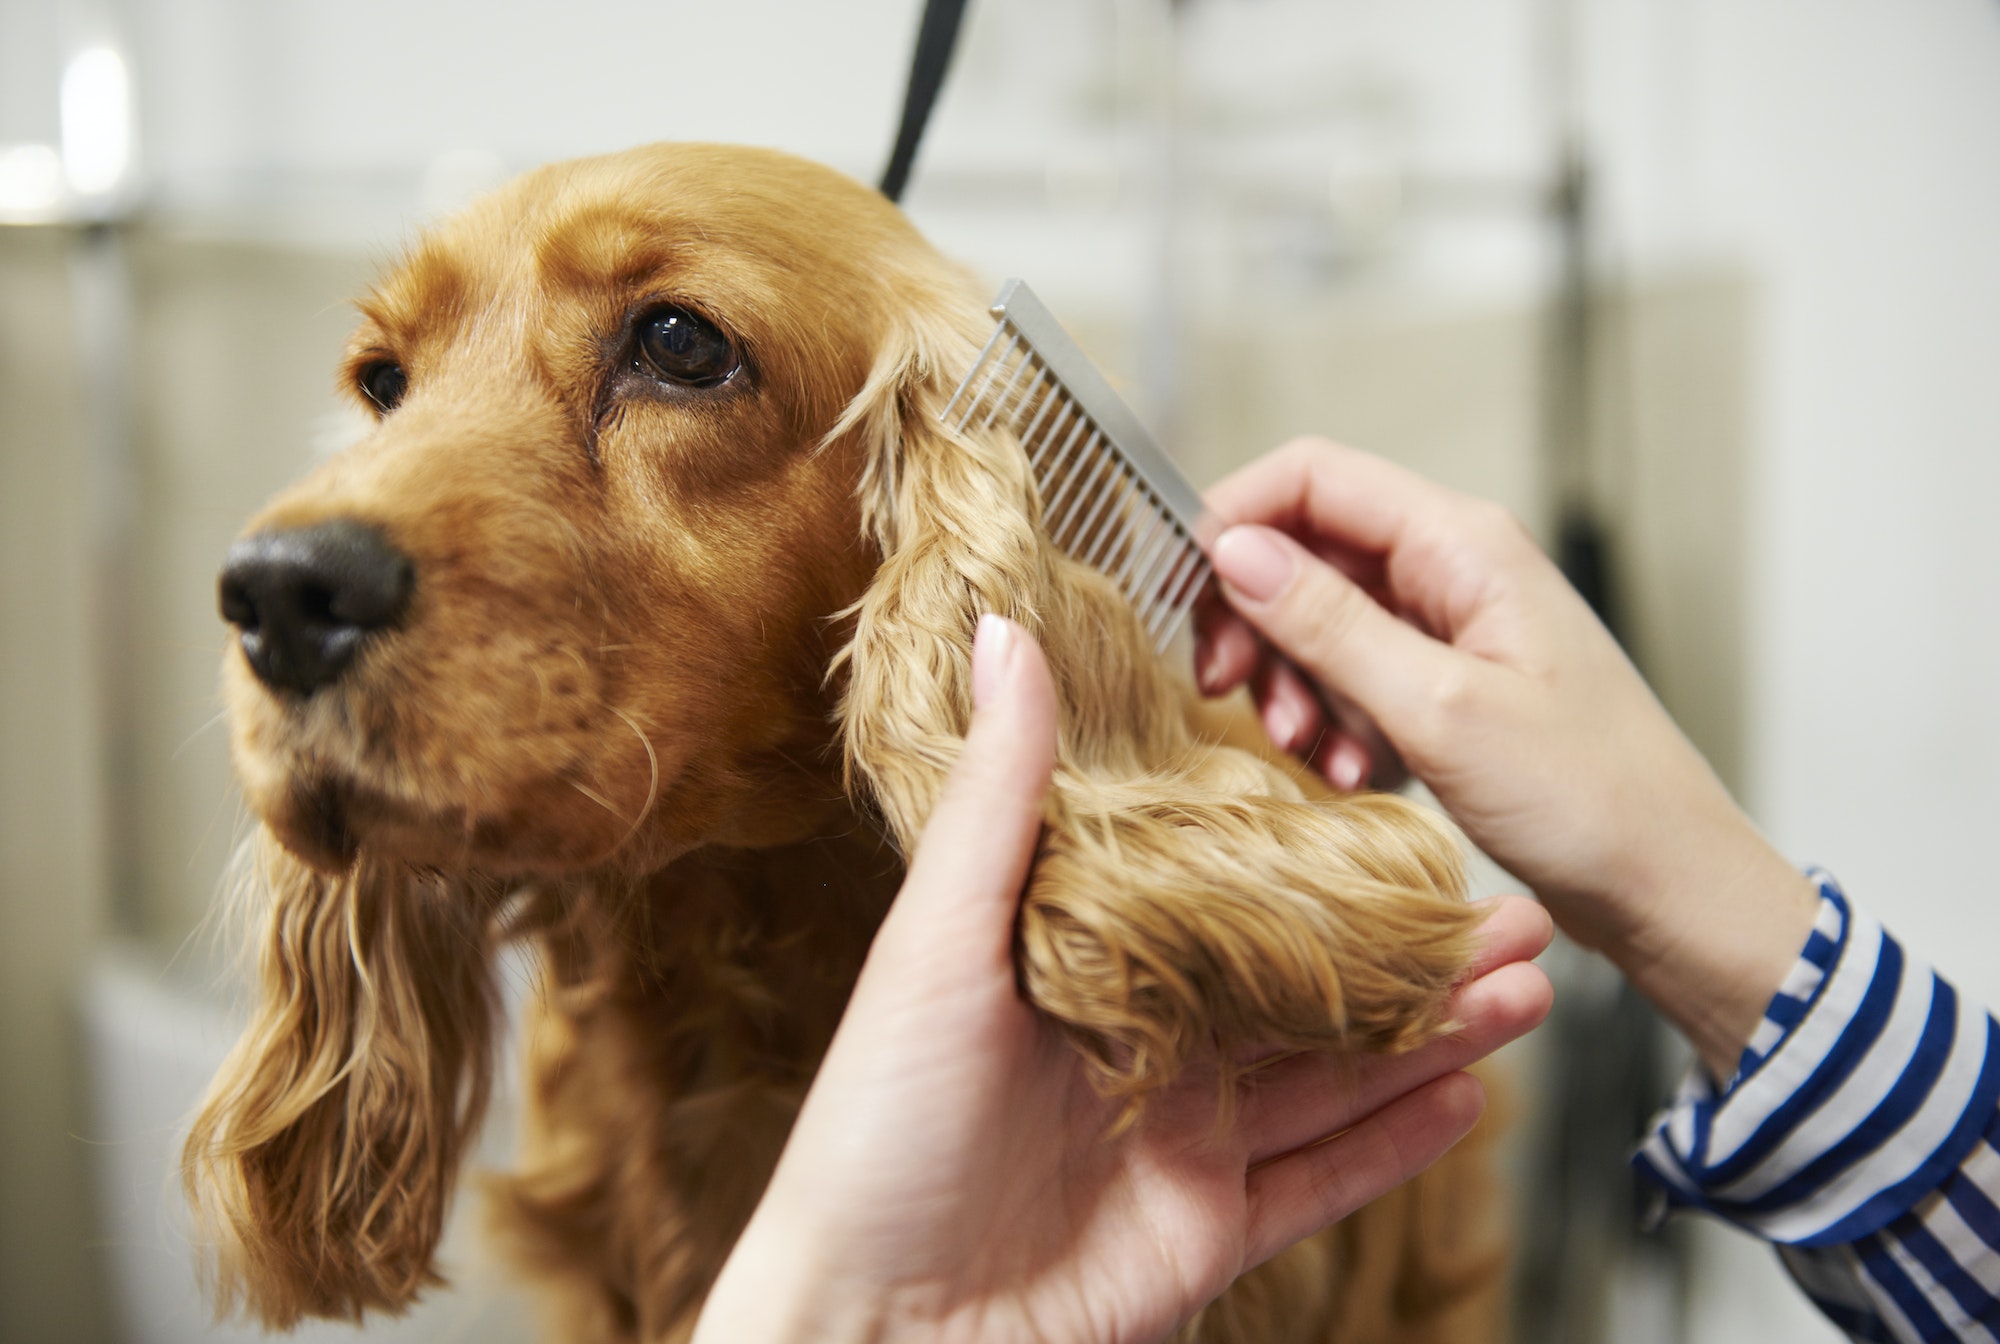 Hands of female groomer combing cocker spaniel's ear at dog grooming salon